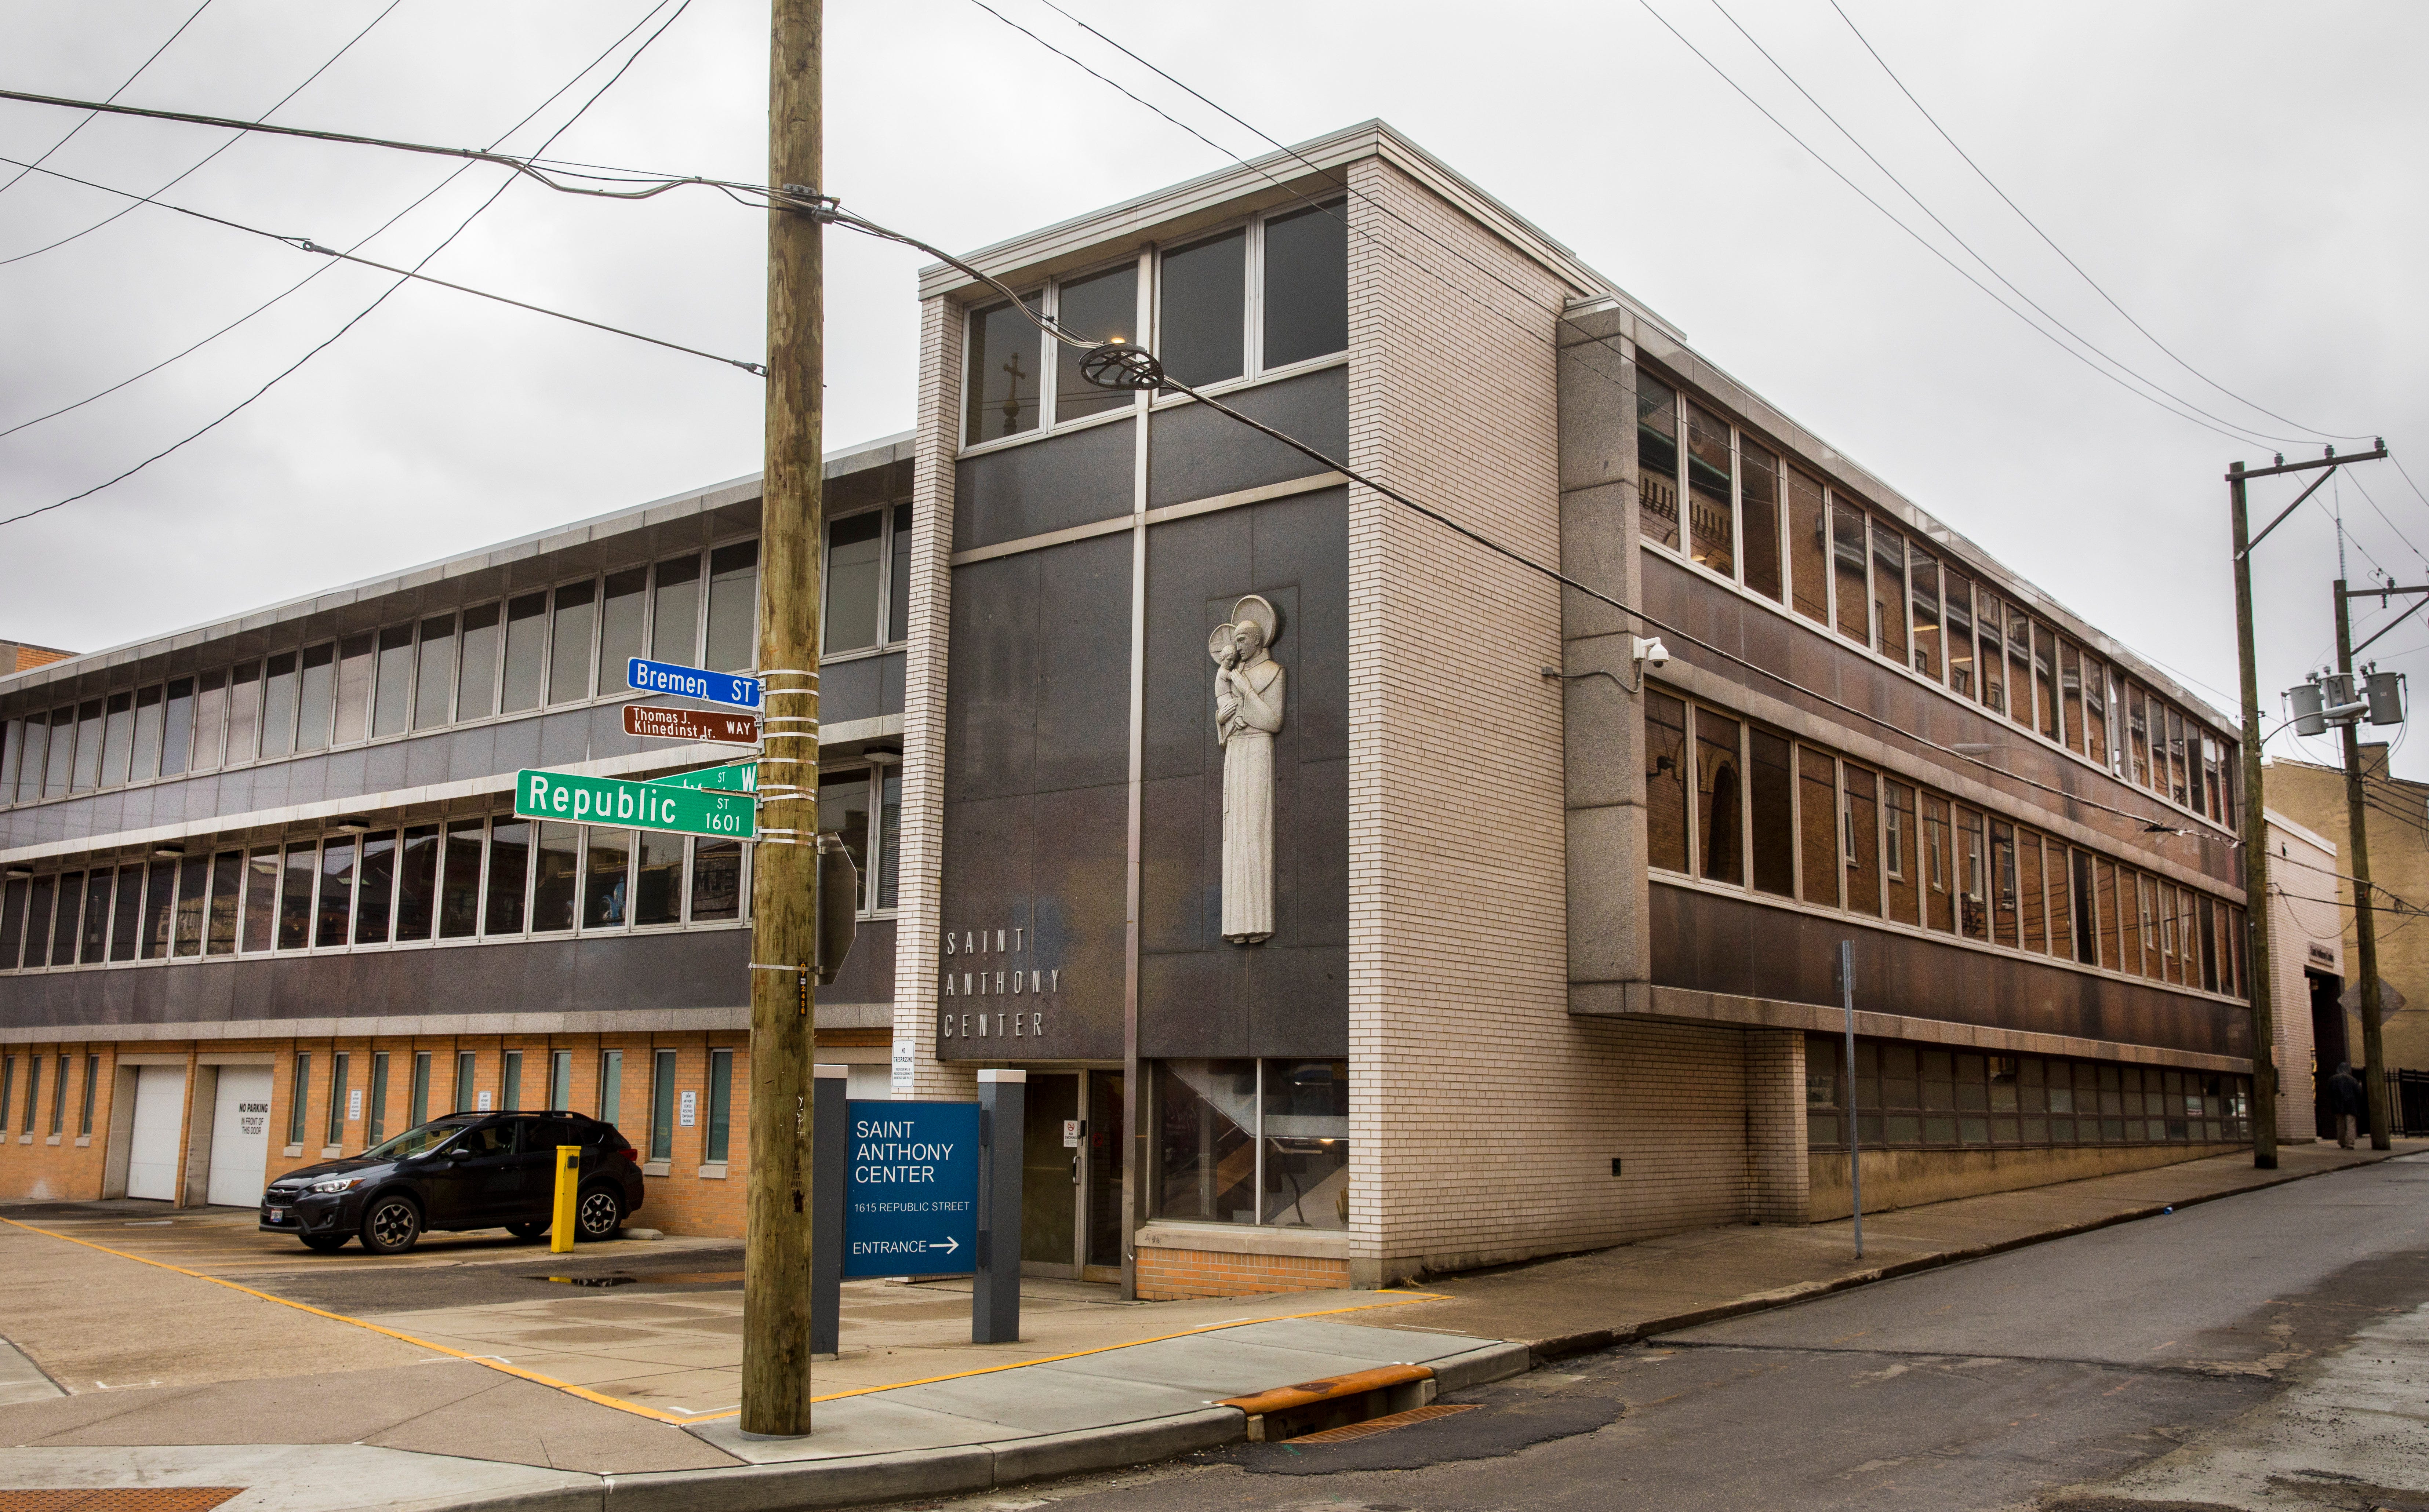 It's not an eye-catching building, but within St. Anthony Center in Over-the-Rhine are multiple services for homeless and indigent people. The center is an example of a collaboration of services joining under one roof to feed, clothe and serve basic needs to those who otherwise go without.